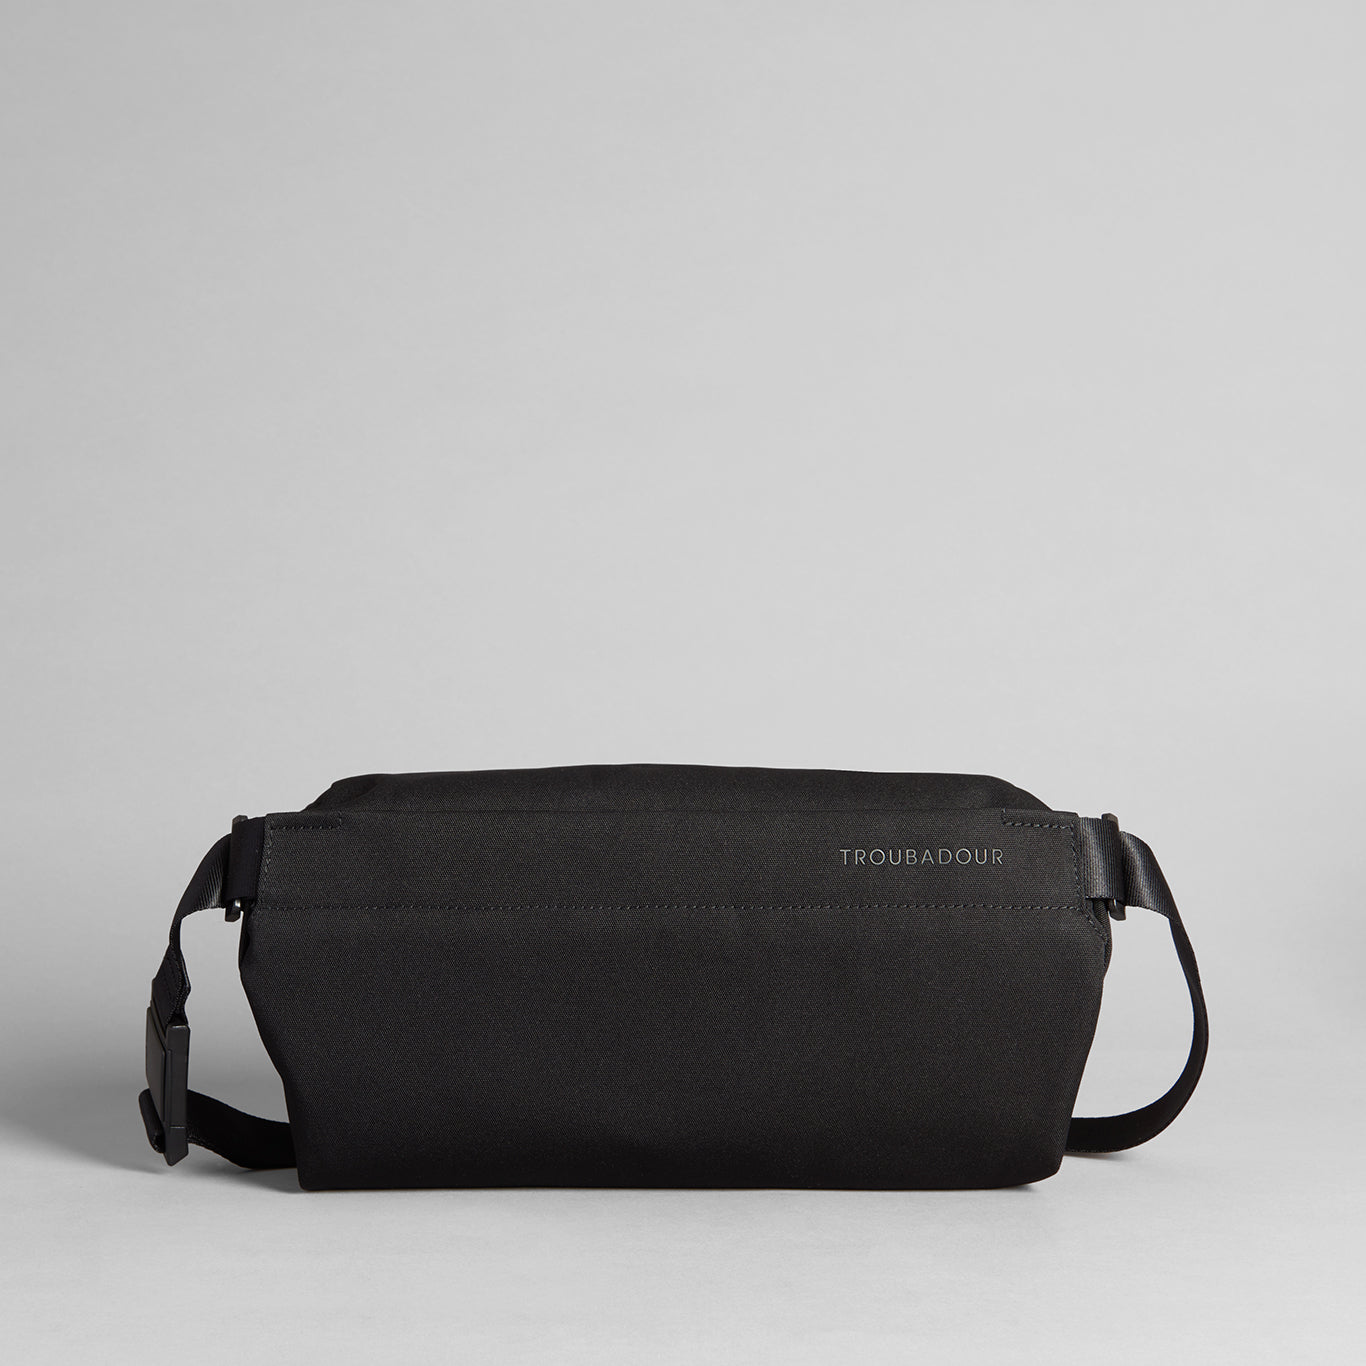 Sling bags for men are ultimate fashion plus utilitarian accessory